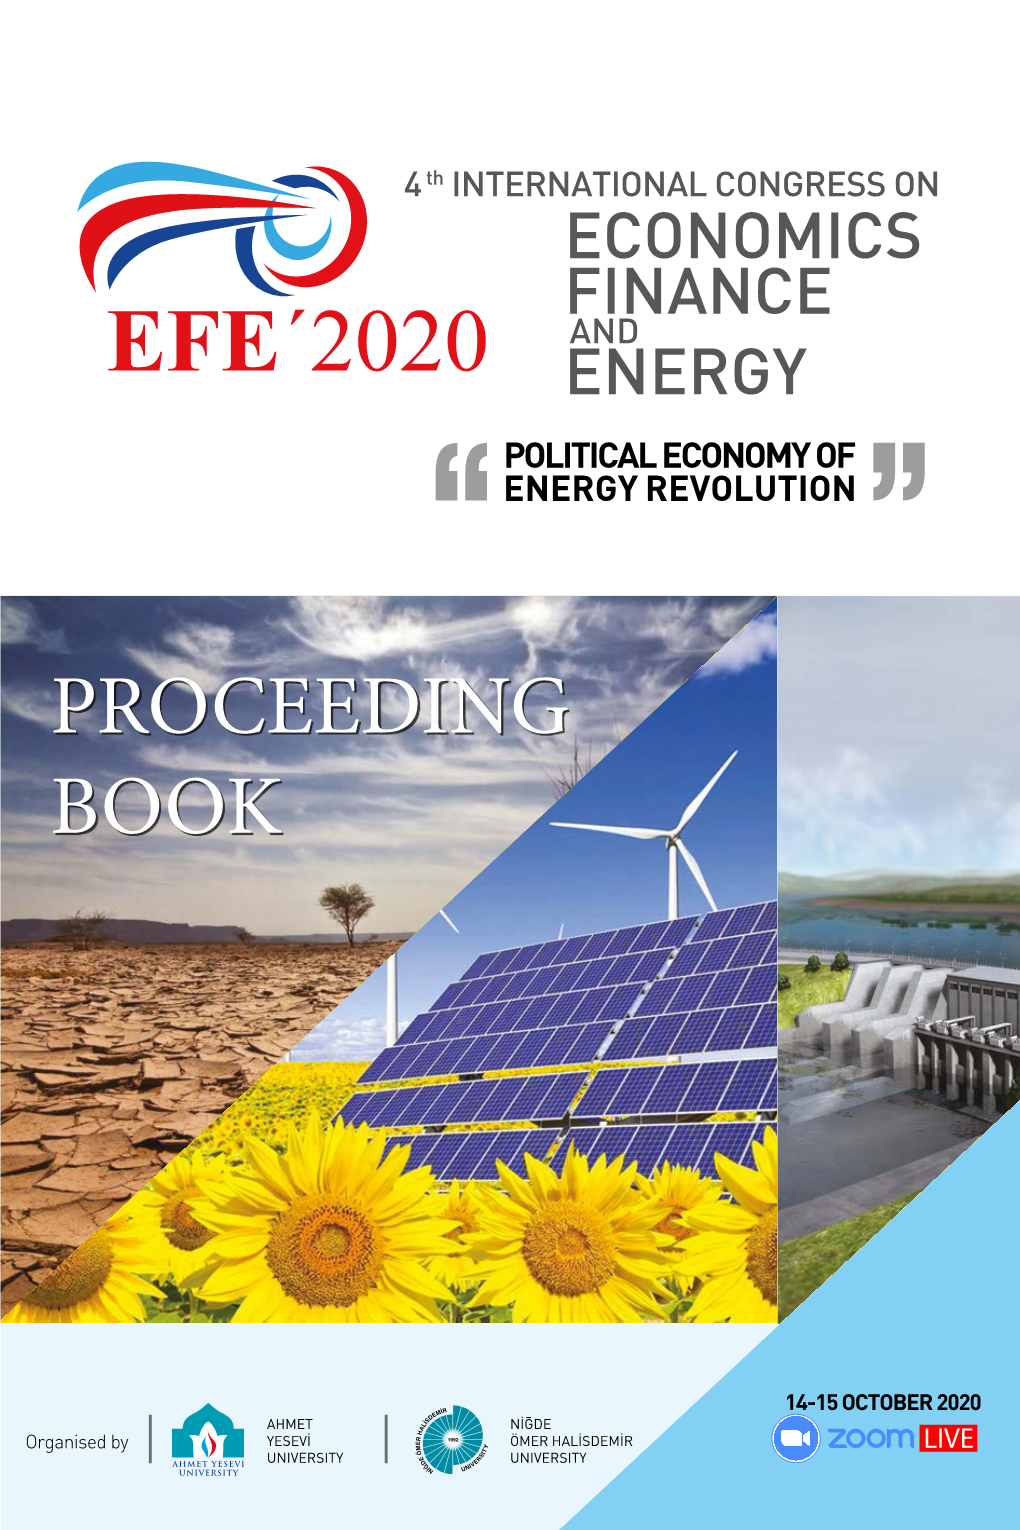 4Th International Congress on Economics, Finance and Energy “Political Economy of Energy Revolution” Is Chosen As the Main Theme